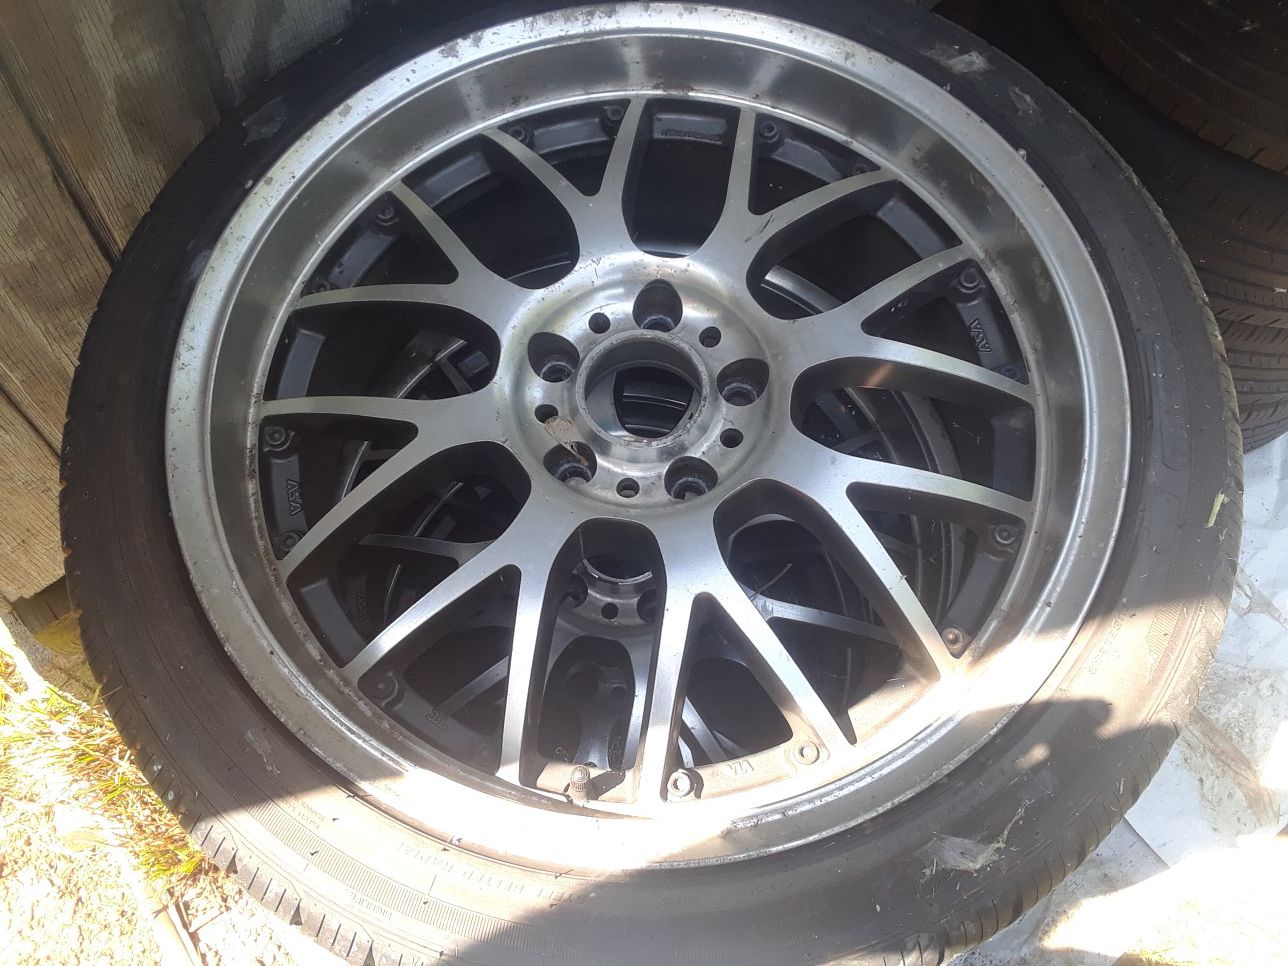 18 inch asa rims 225 45 18 tires the tires are close to new few flaws on rims not perfect 5x112 I believe they came off 98 audi a4